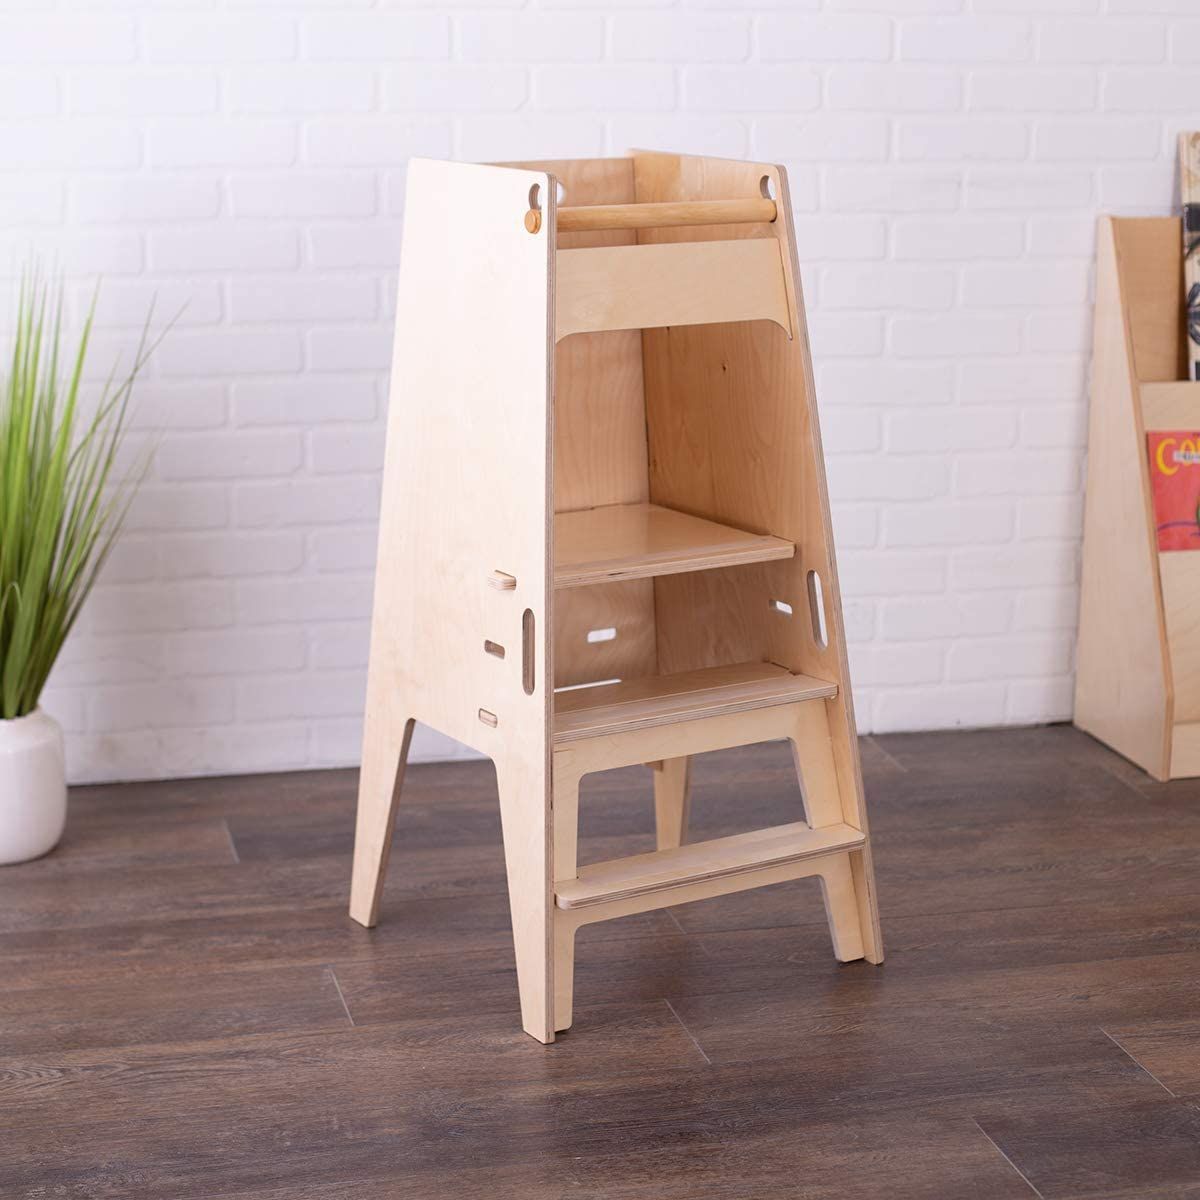 Great Correctly Motherland 5 Best Learning Towers - Top Helper Stools for Toddlers